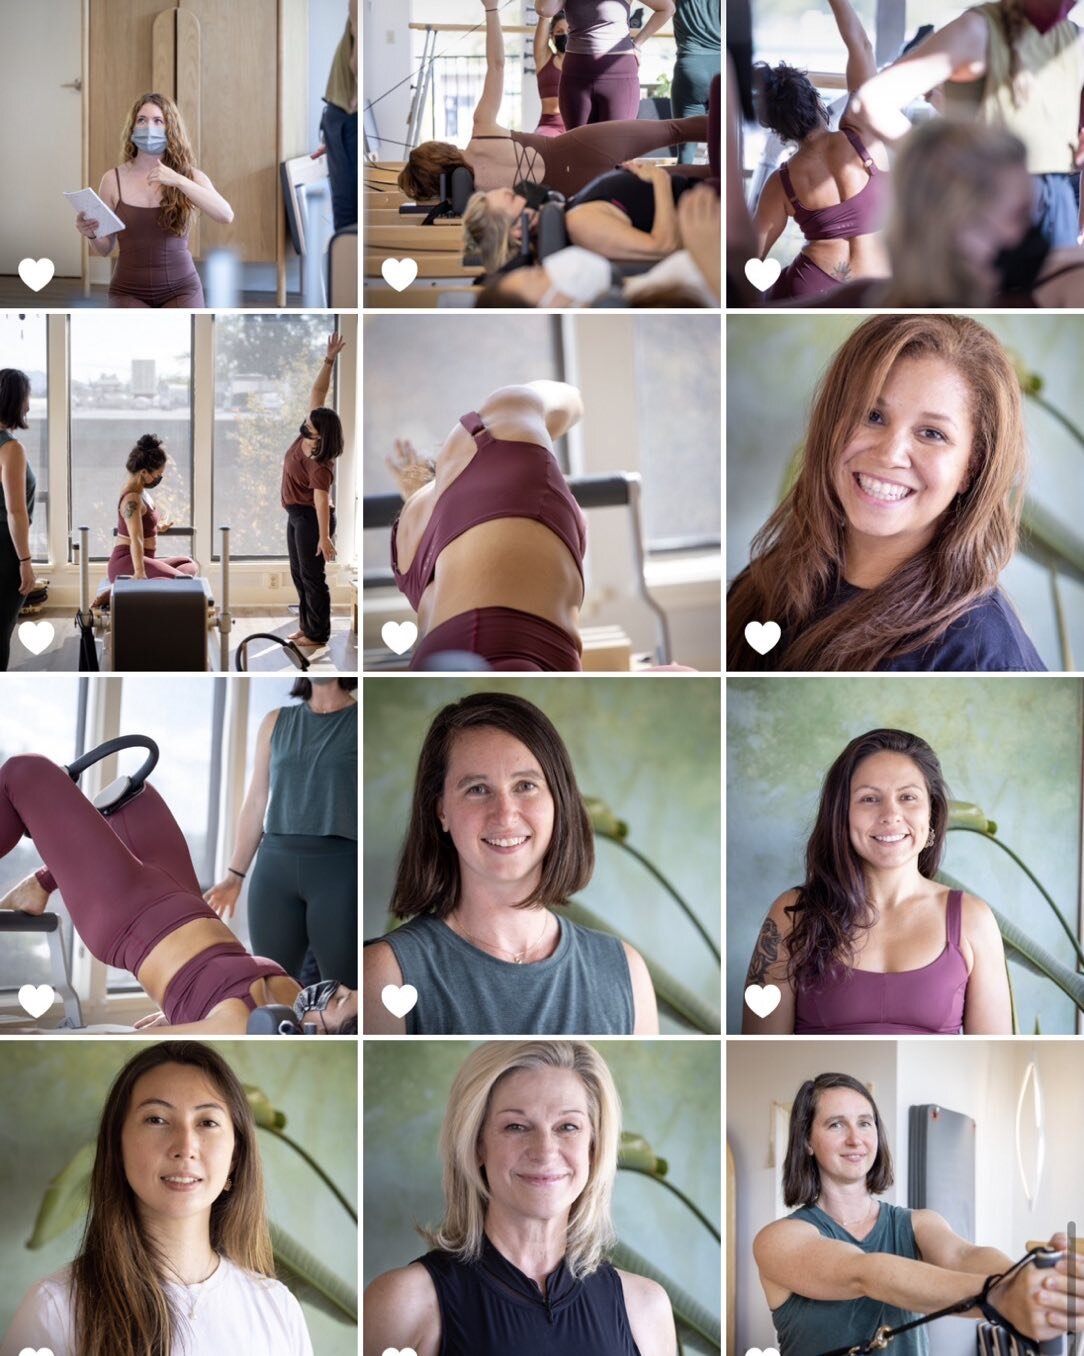 It&rsquo;s just to hard to pick just one picture today &amp; after looking over pictures from our recently trained Pilates instructors. 🌿I am proud to say that our team at PIVOT ⭐️ is incredibly diverse, with members from different cultural backgrou